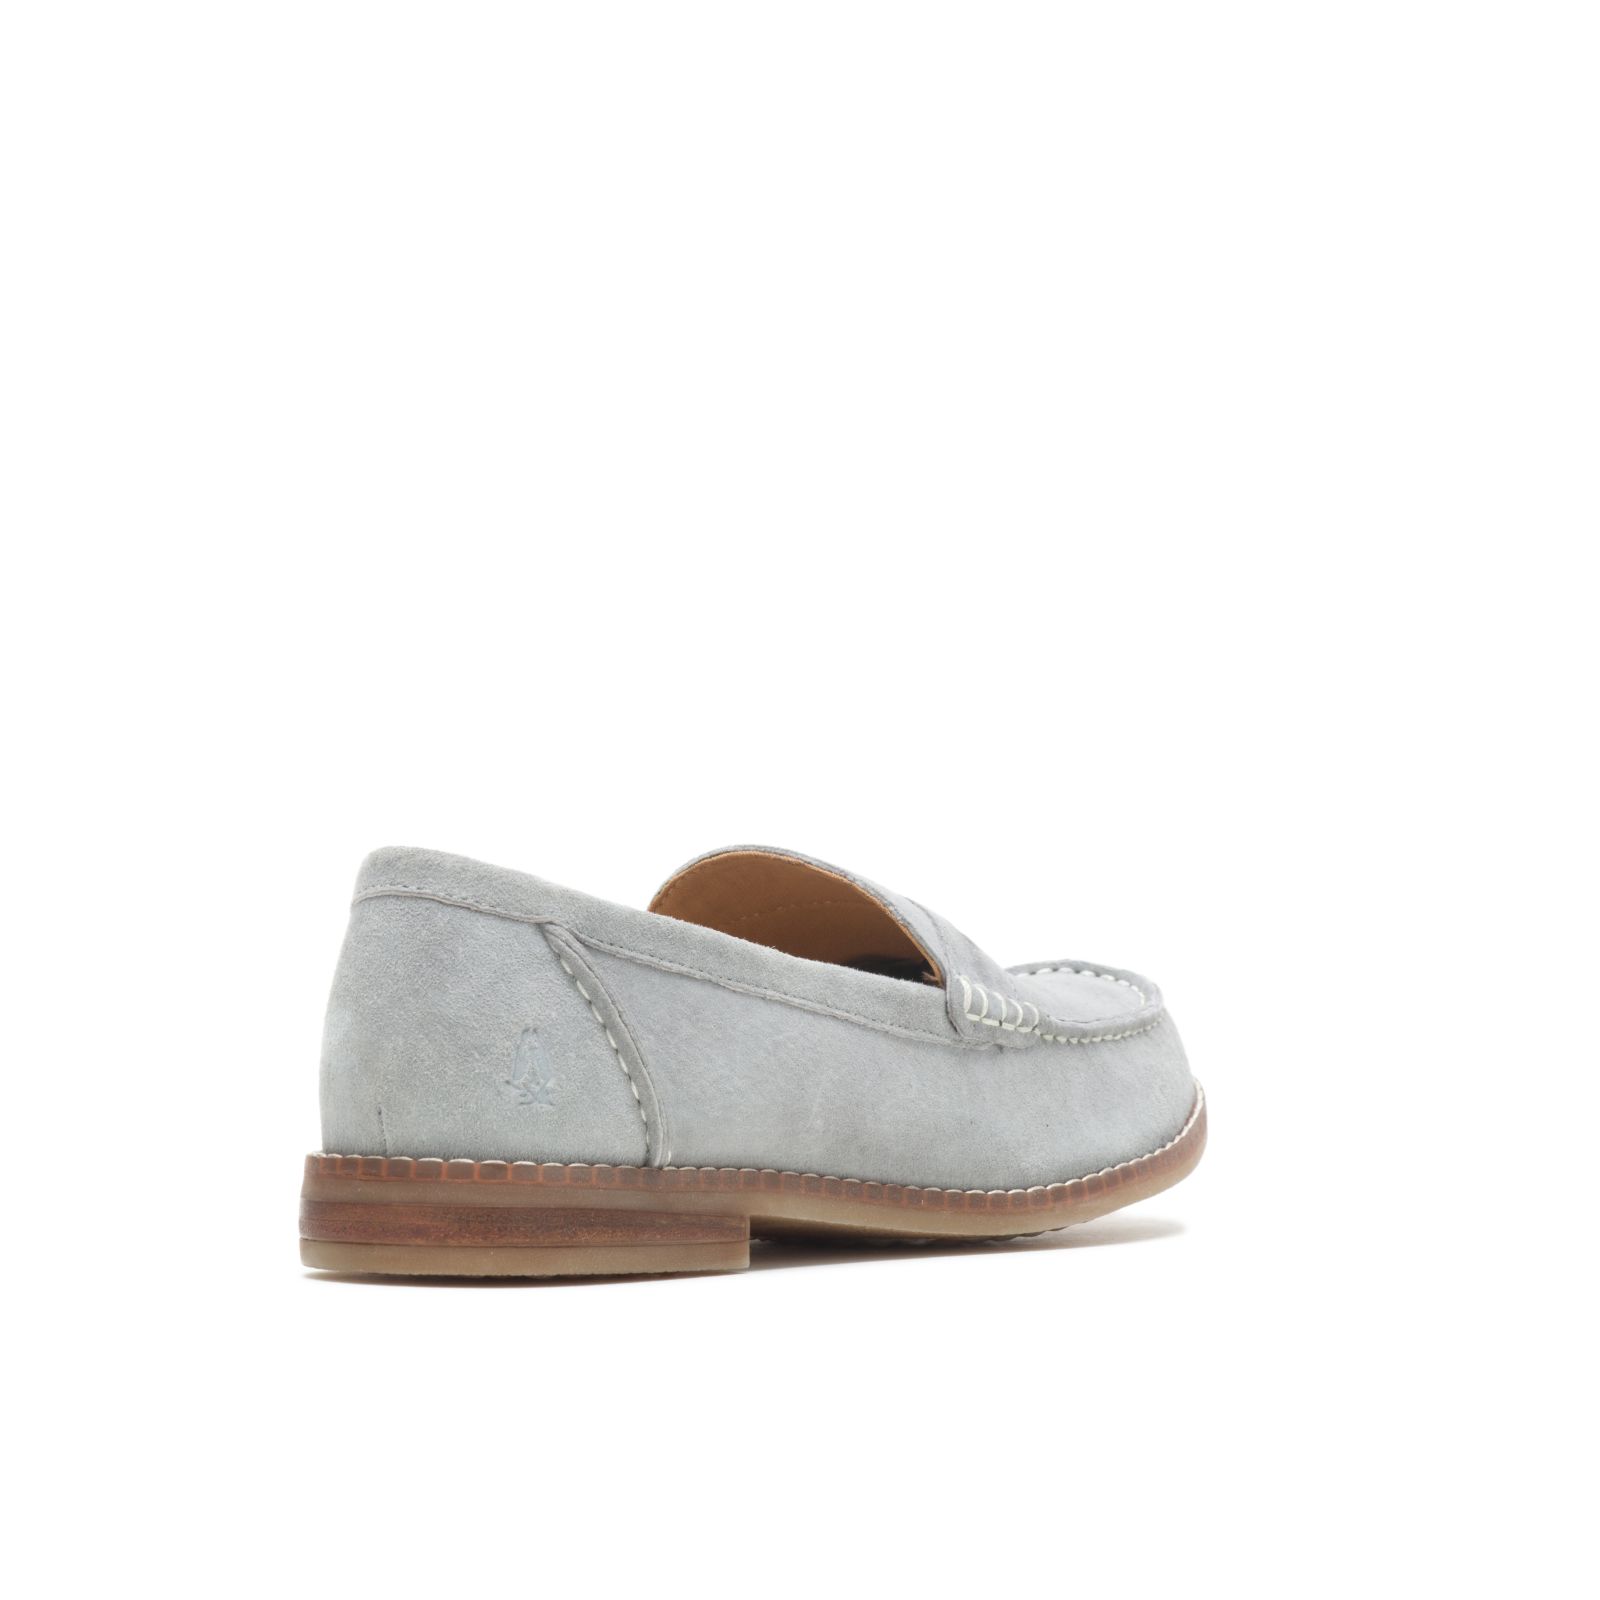 Loafers Hush Puppies Wren Mujer Grises | GIJYNXD-53